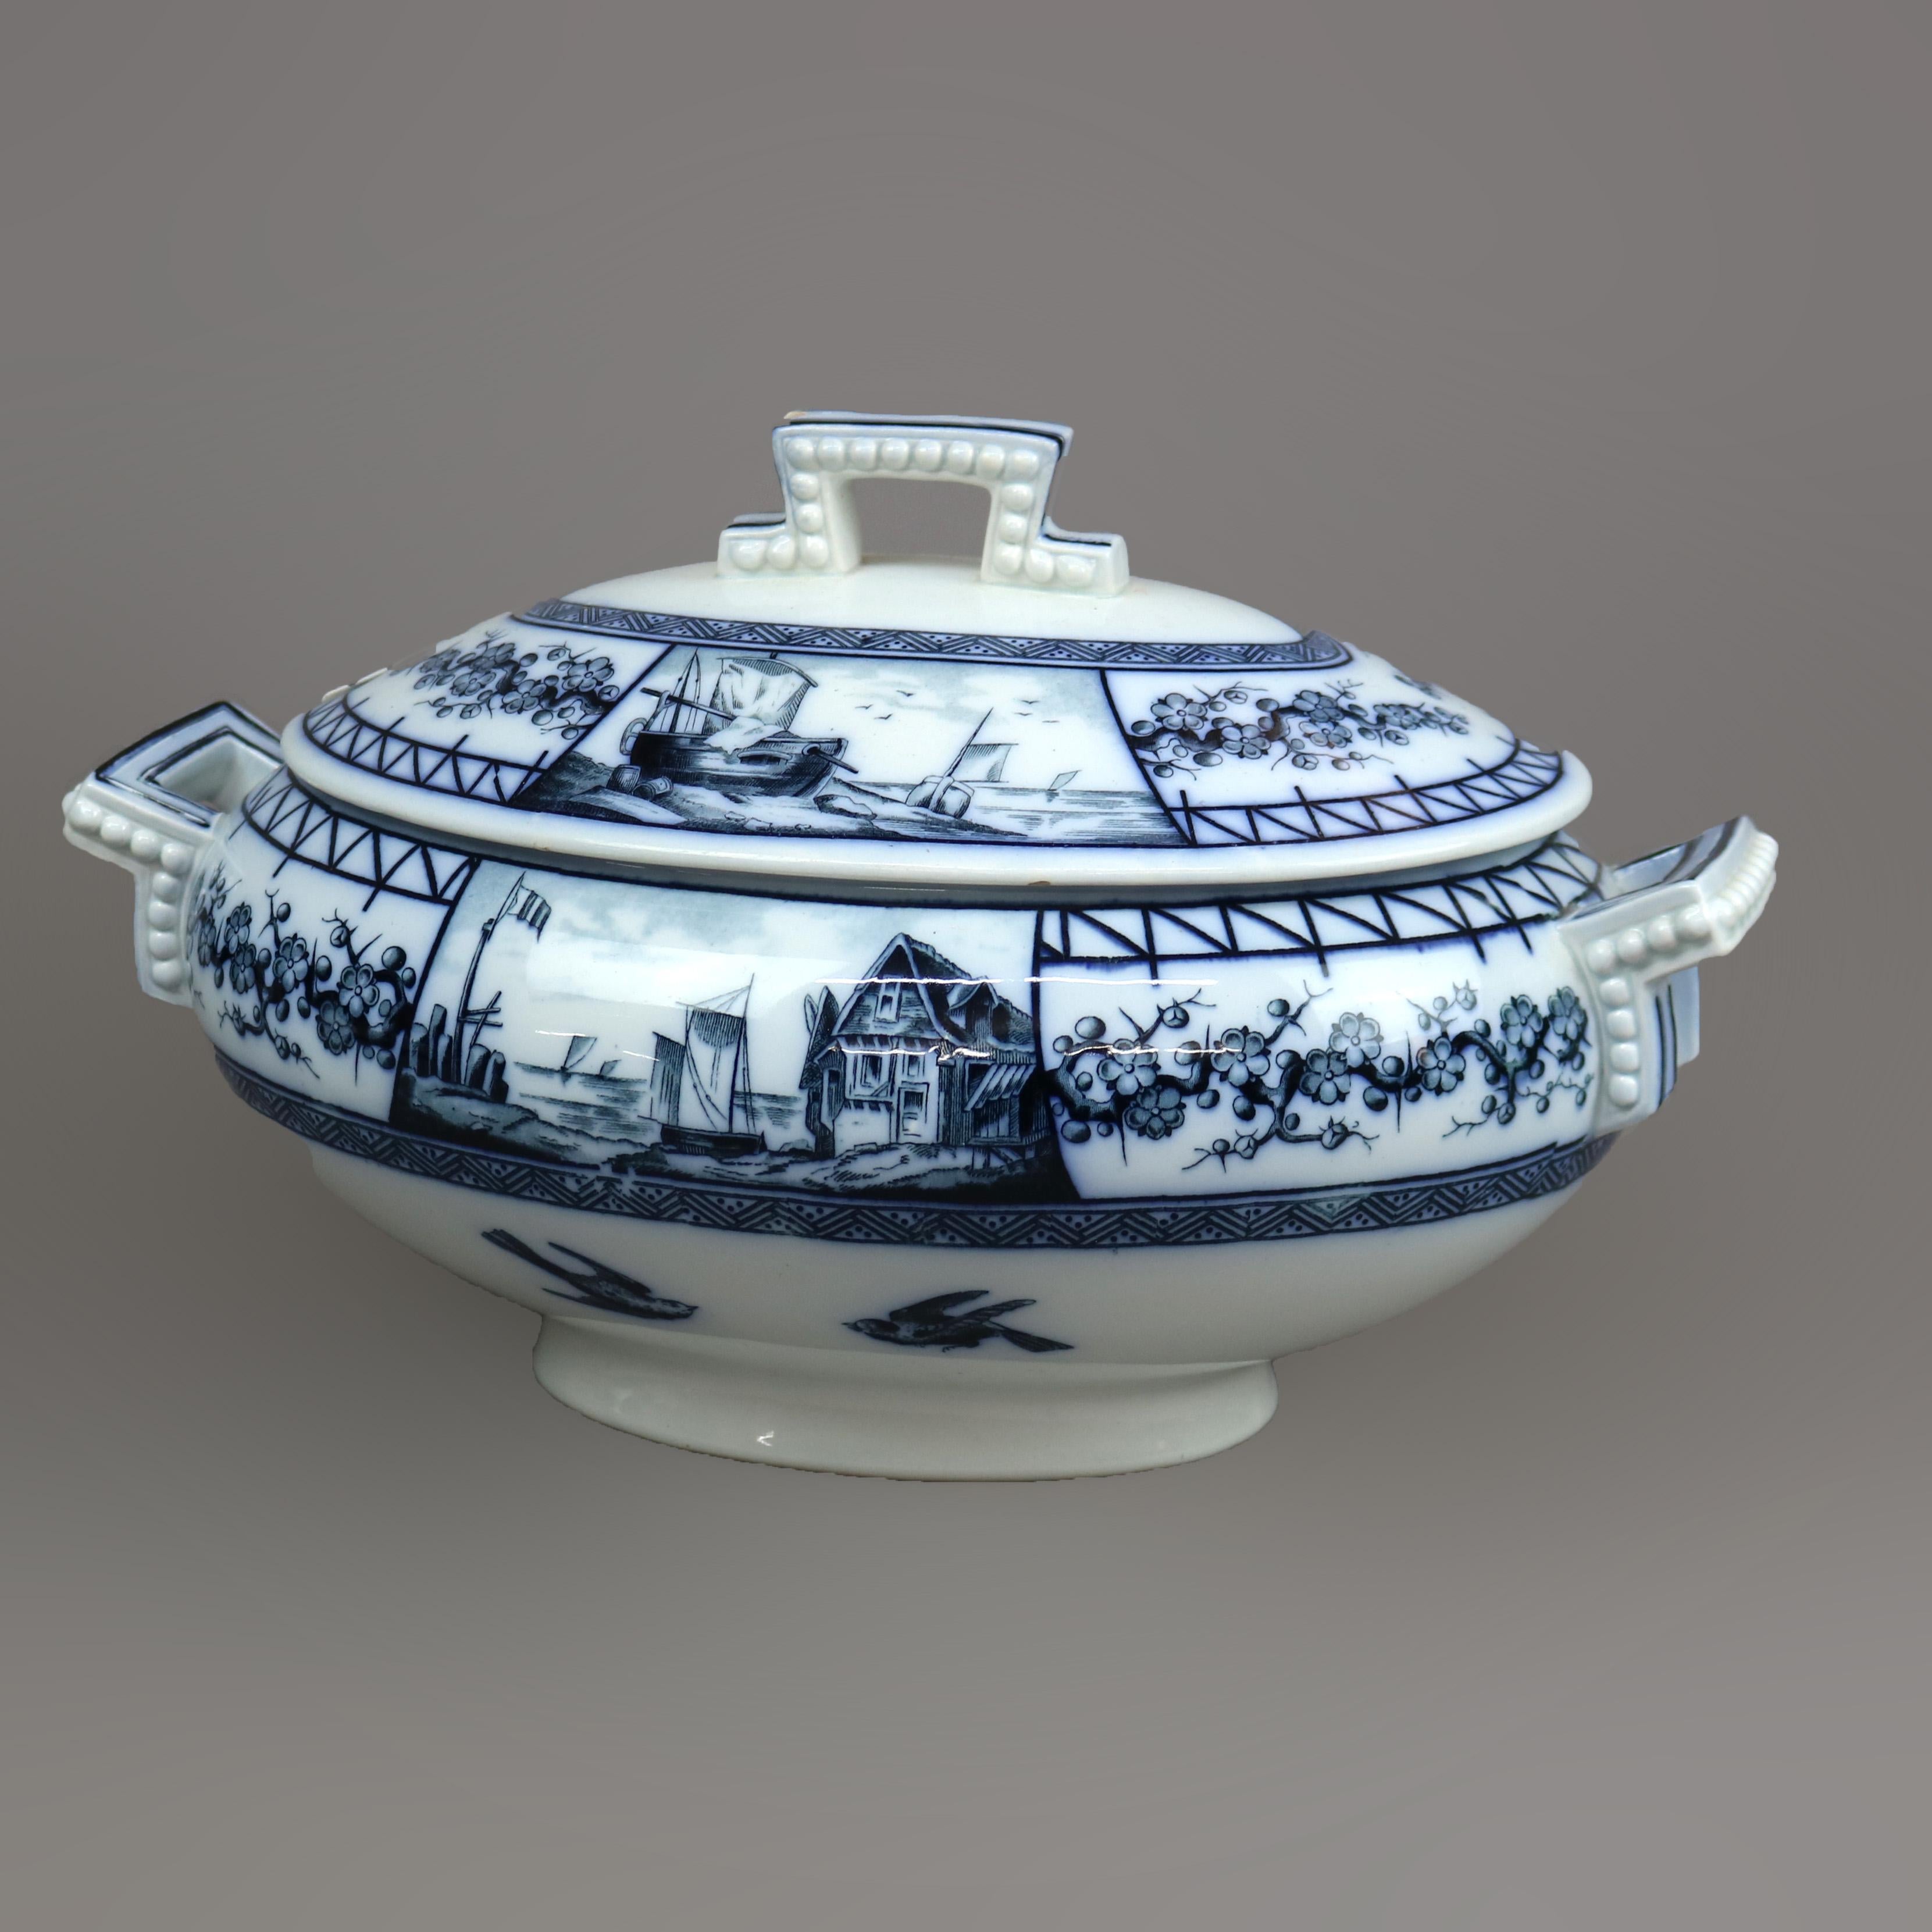 An antique French lidded tureen by BWM & Co. offers glazed pottery construction with well having birds in flight with surround having reserves including maritime seascape and windmill scenes, maker mark en verso as photographed, reminiscent of